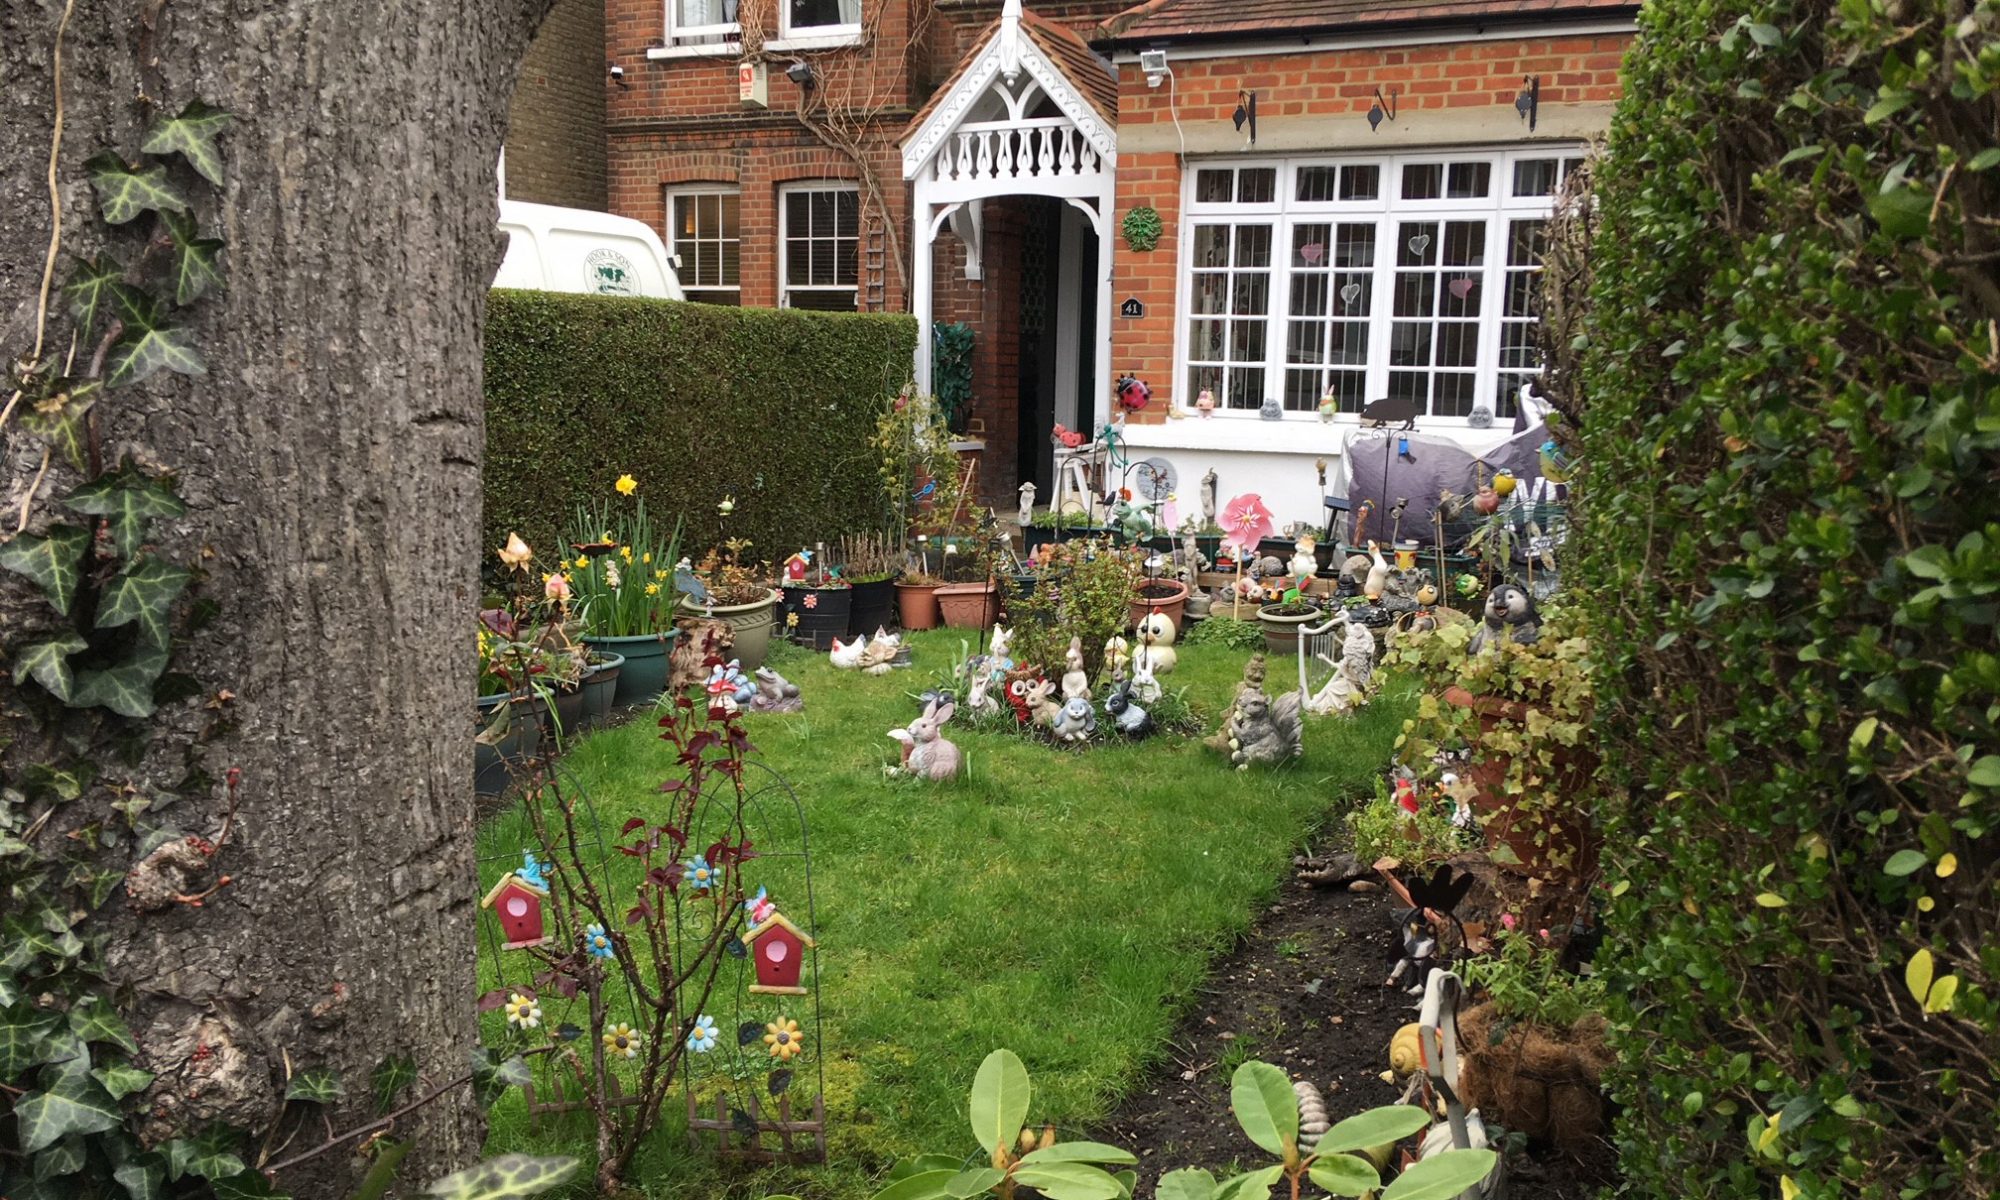 A characterful front garden seen on a trip to Putney